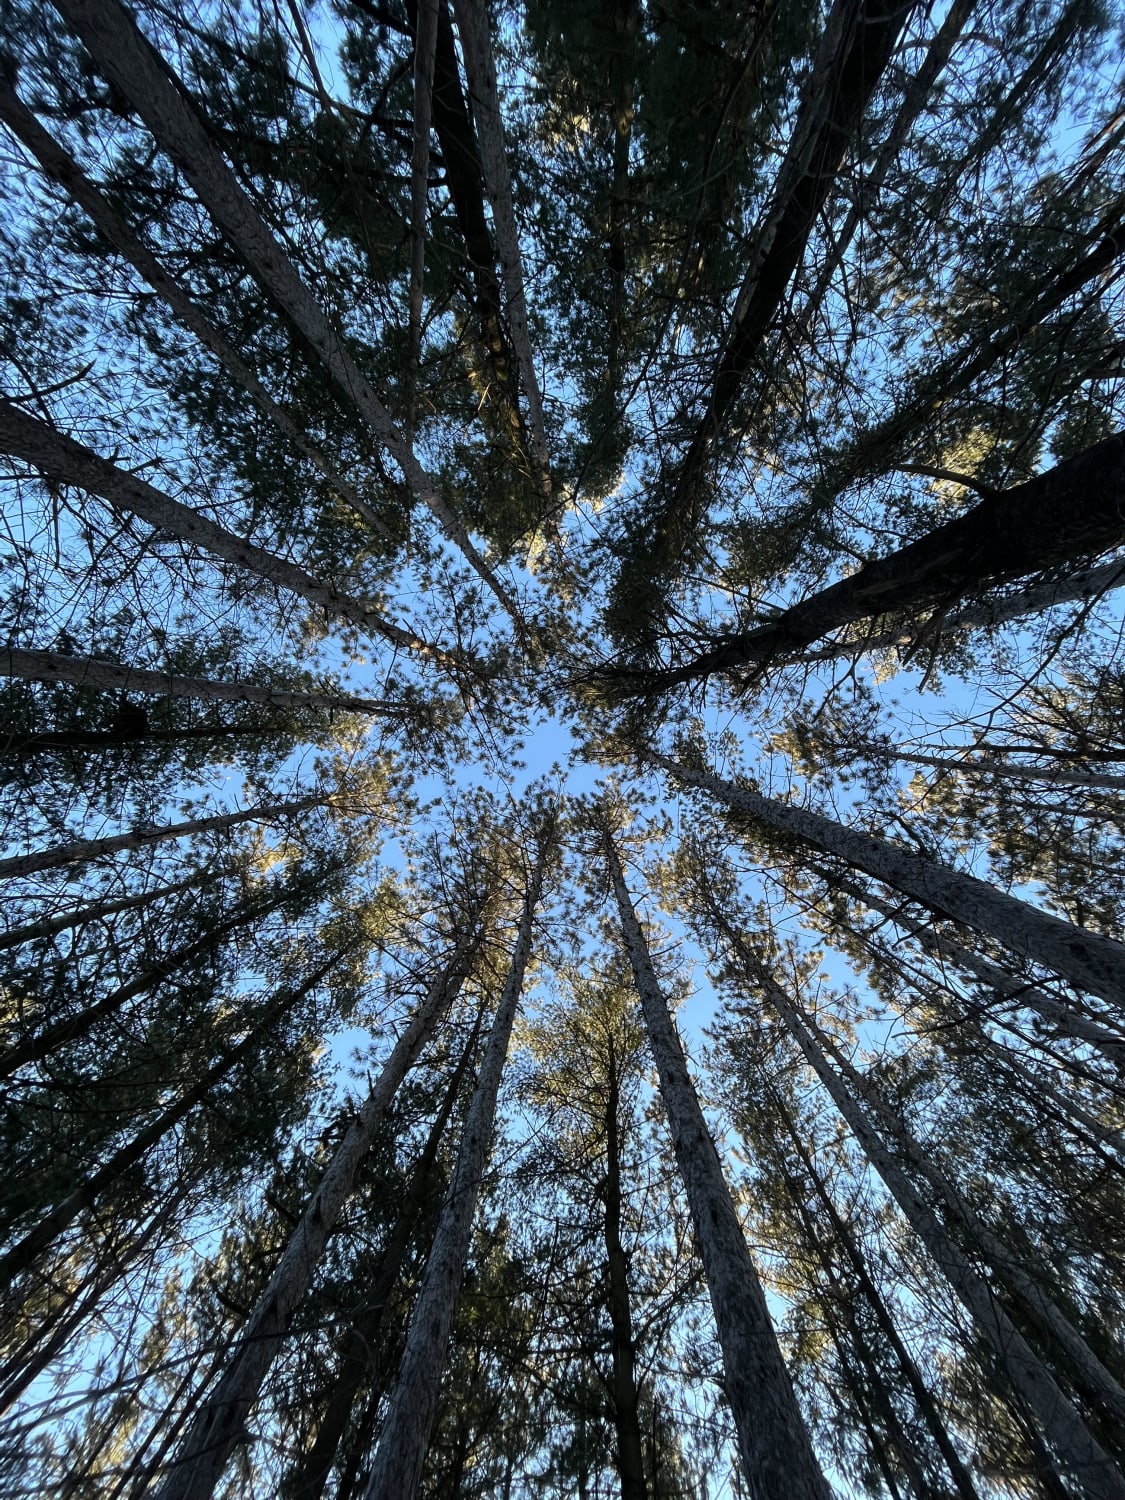 Pine trees in Southern Ontario